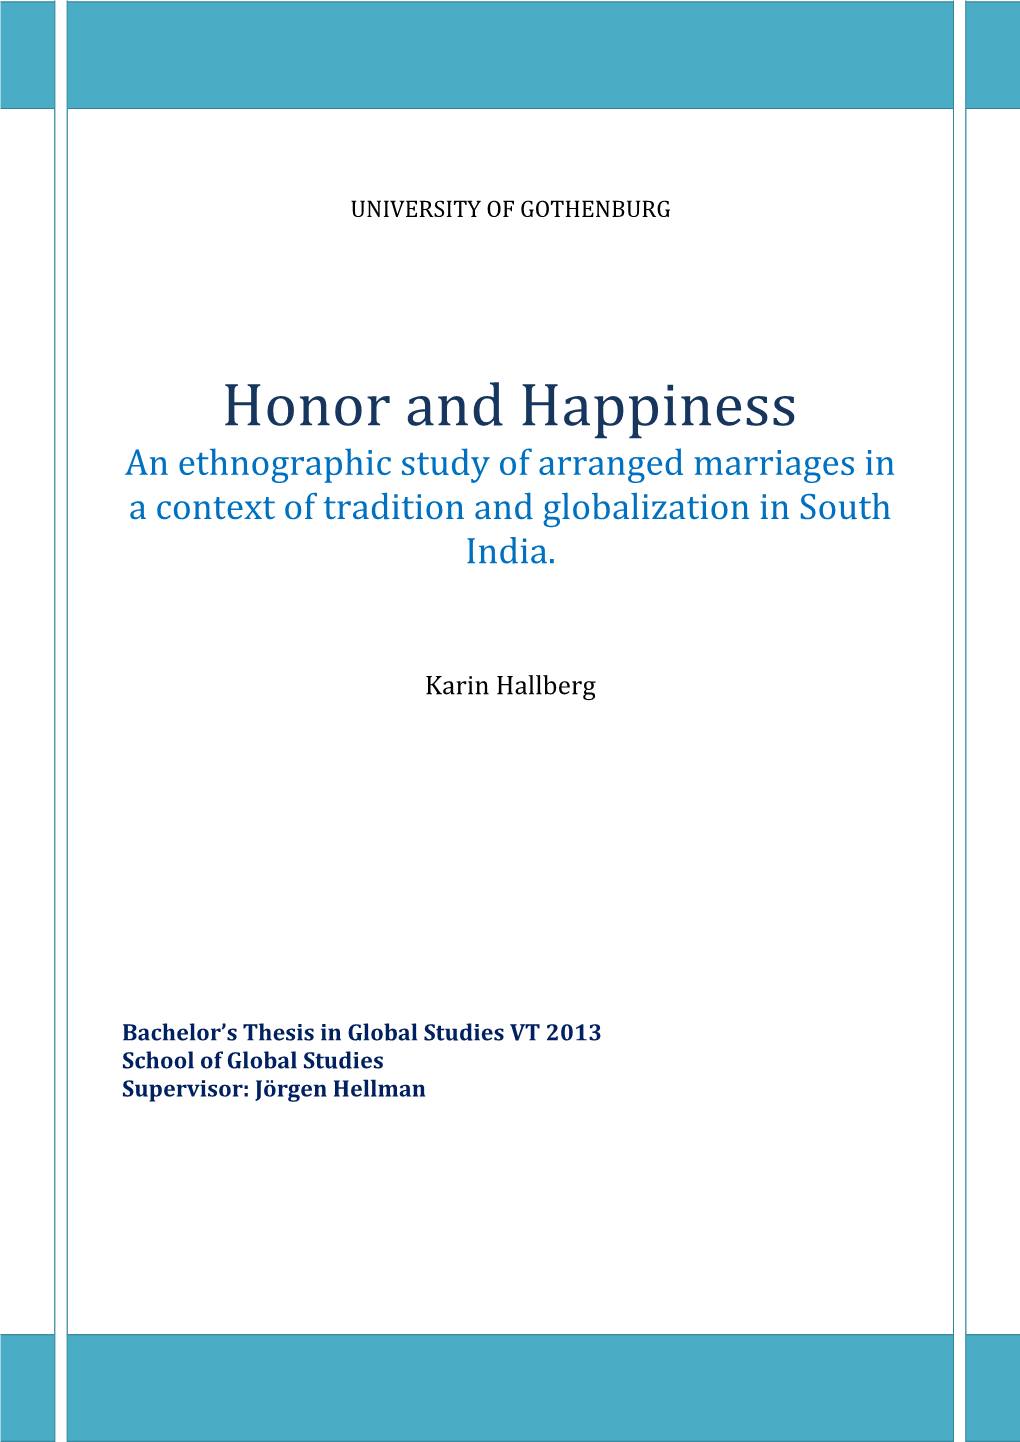 Honor and Happiness an Ethnographic Study of Arranged Marriages in a Context of Tradition and Globalization in South India